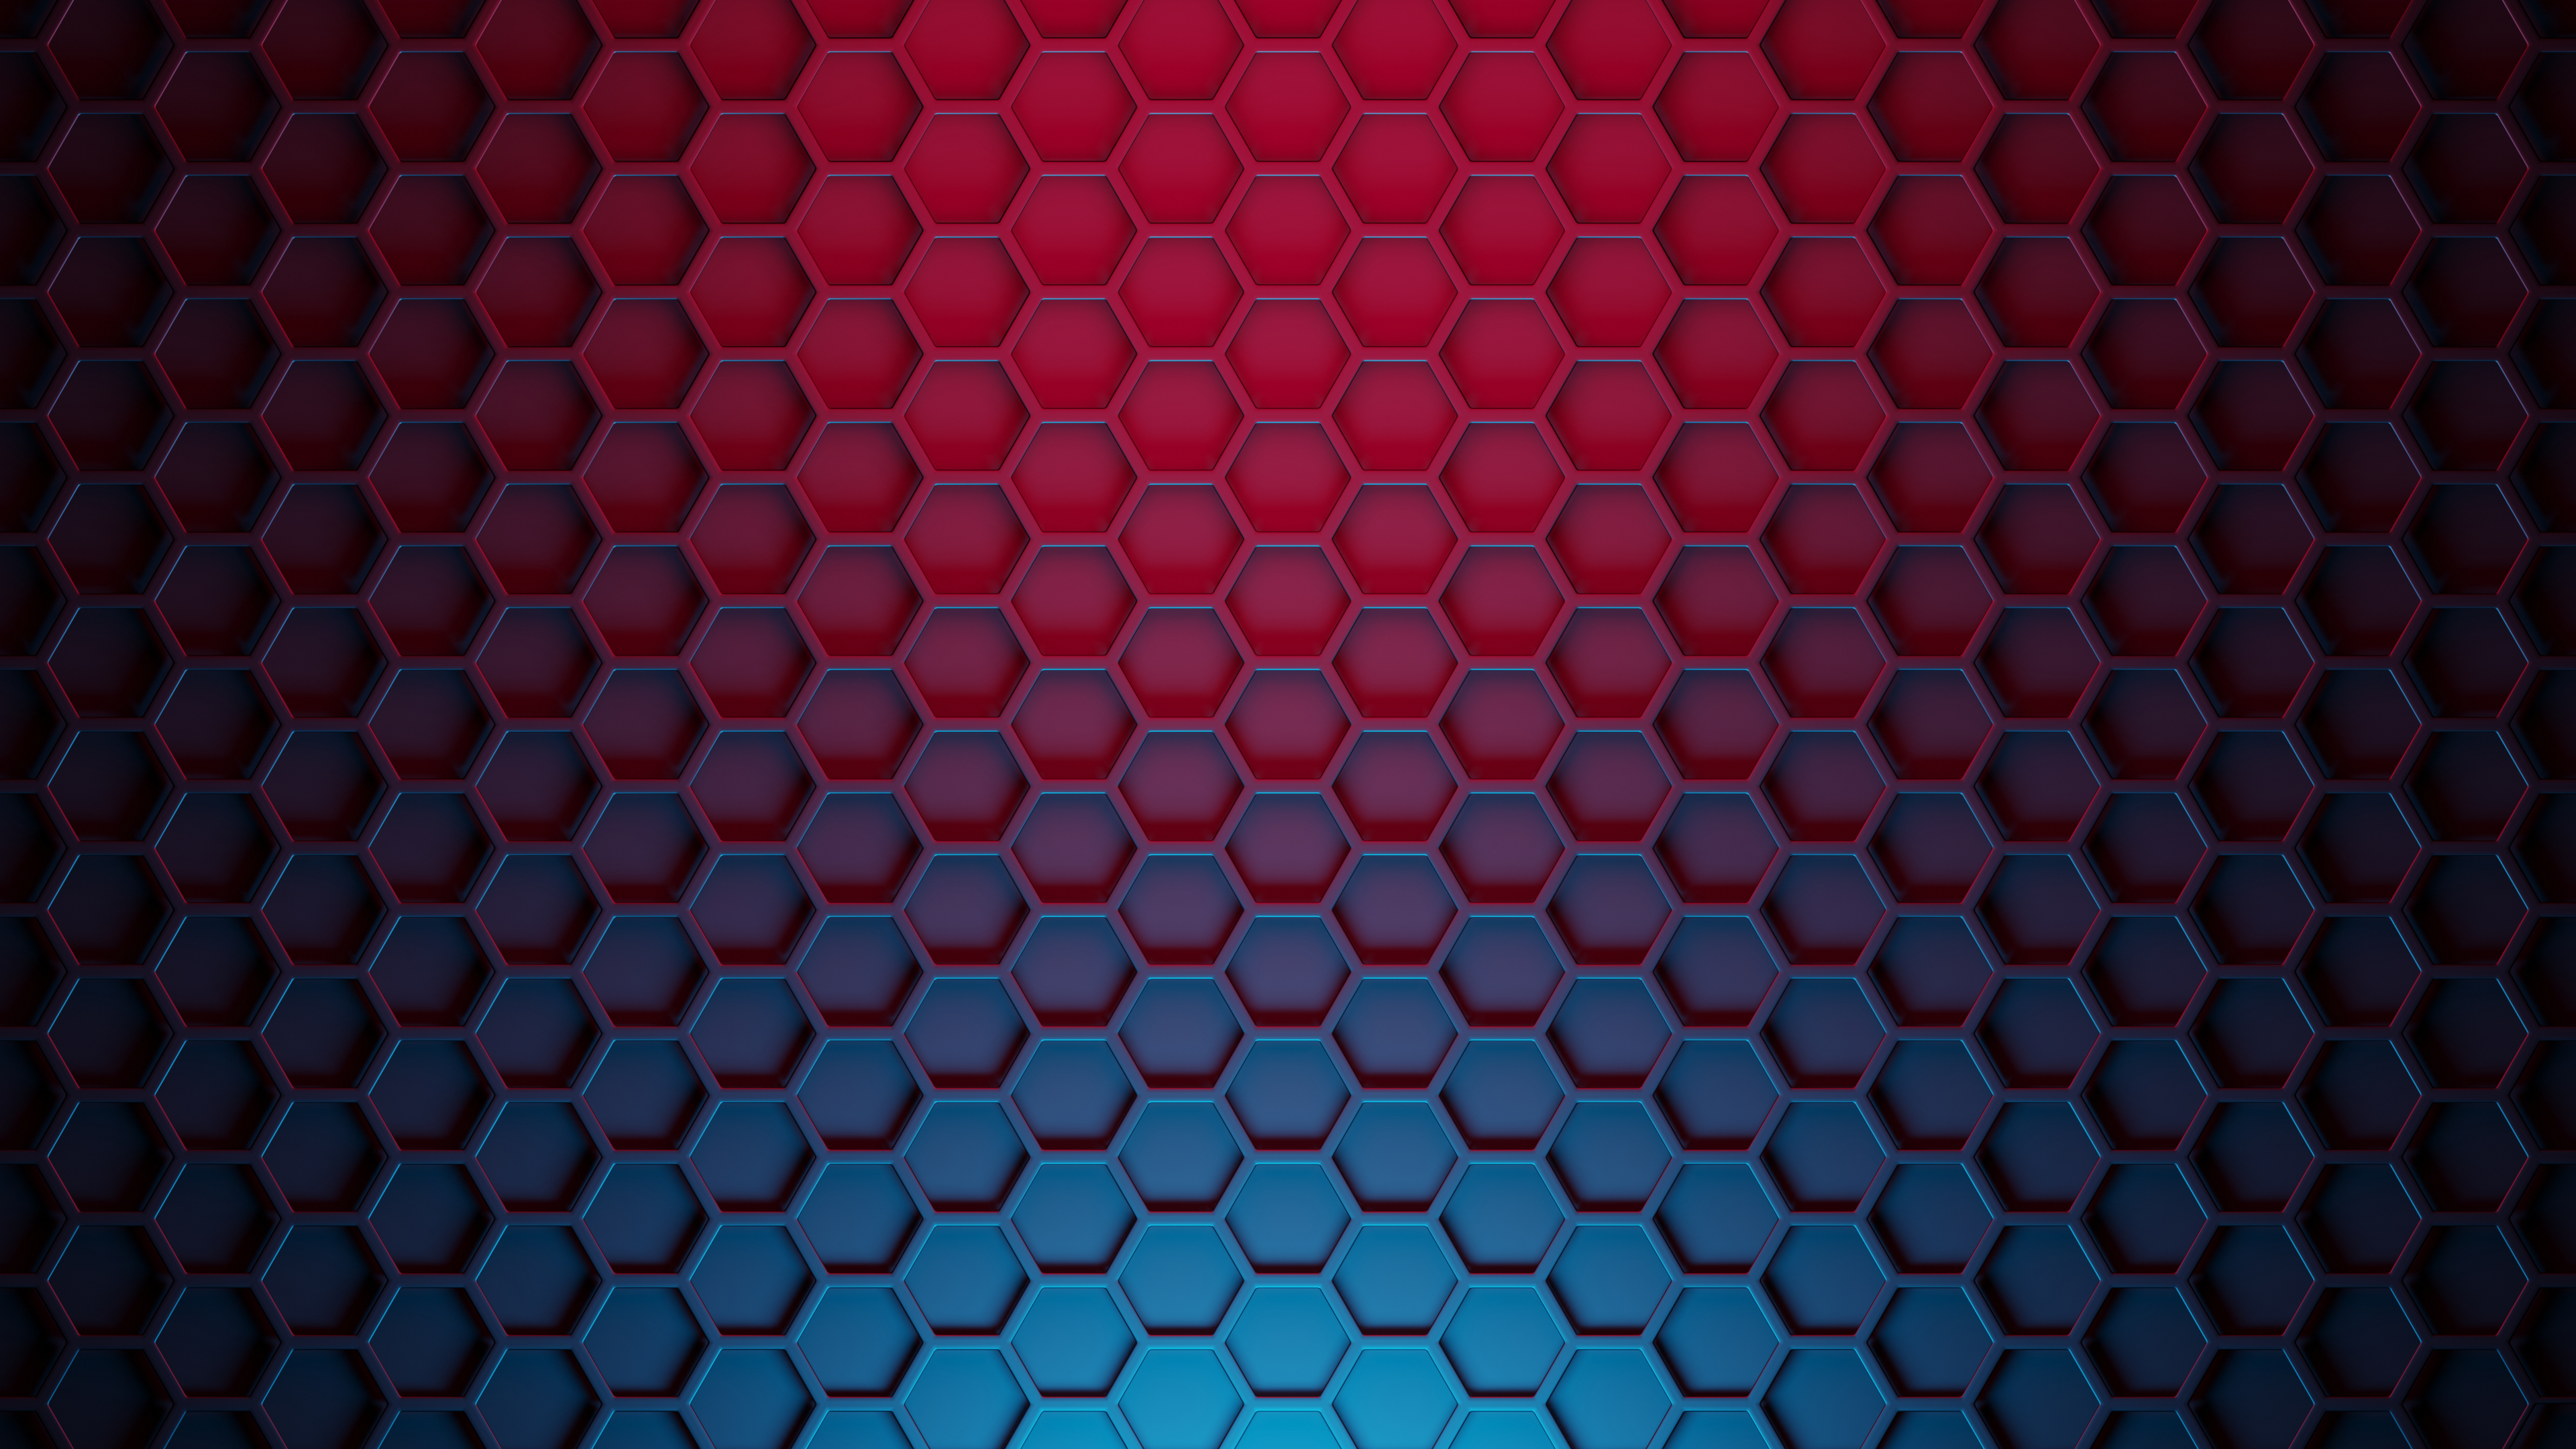 3840x2160 40+ 4K Hexagon Wallpapers | Background Images